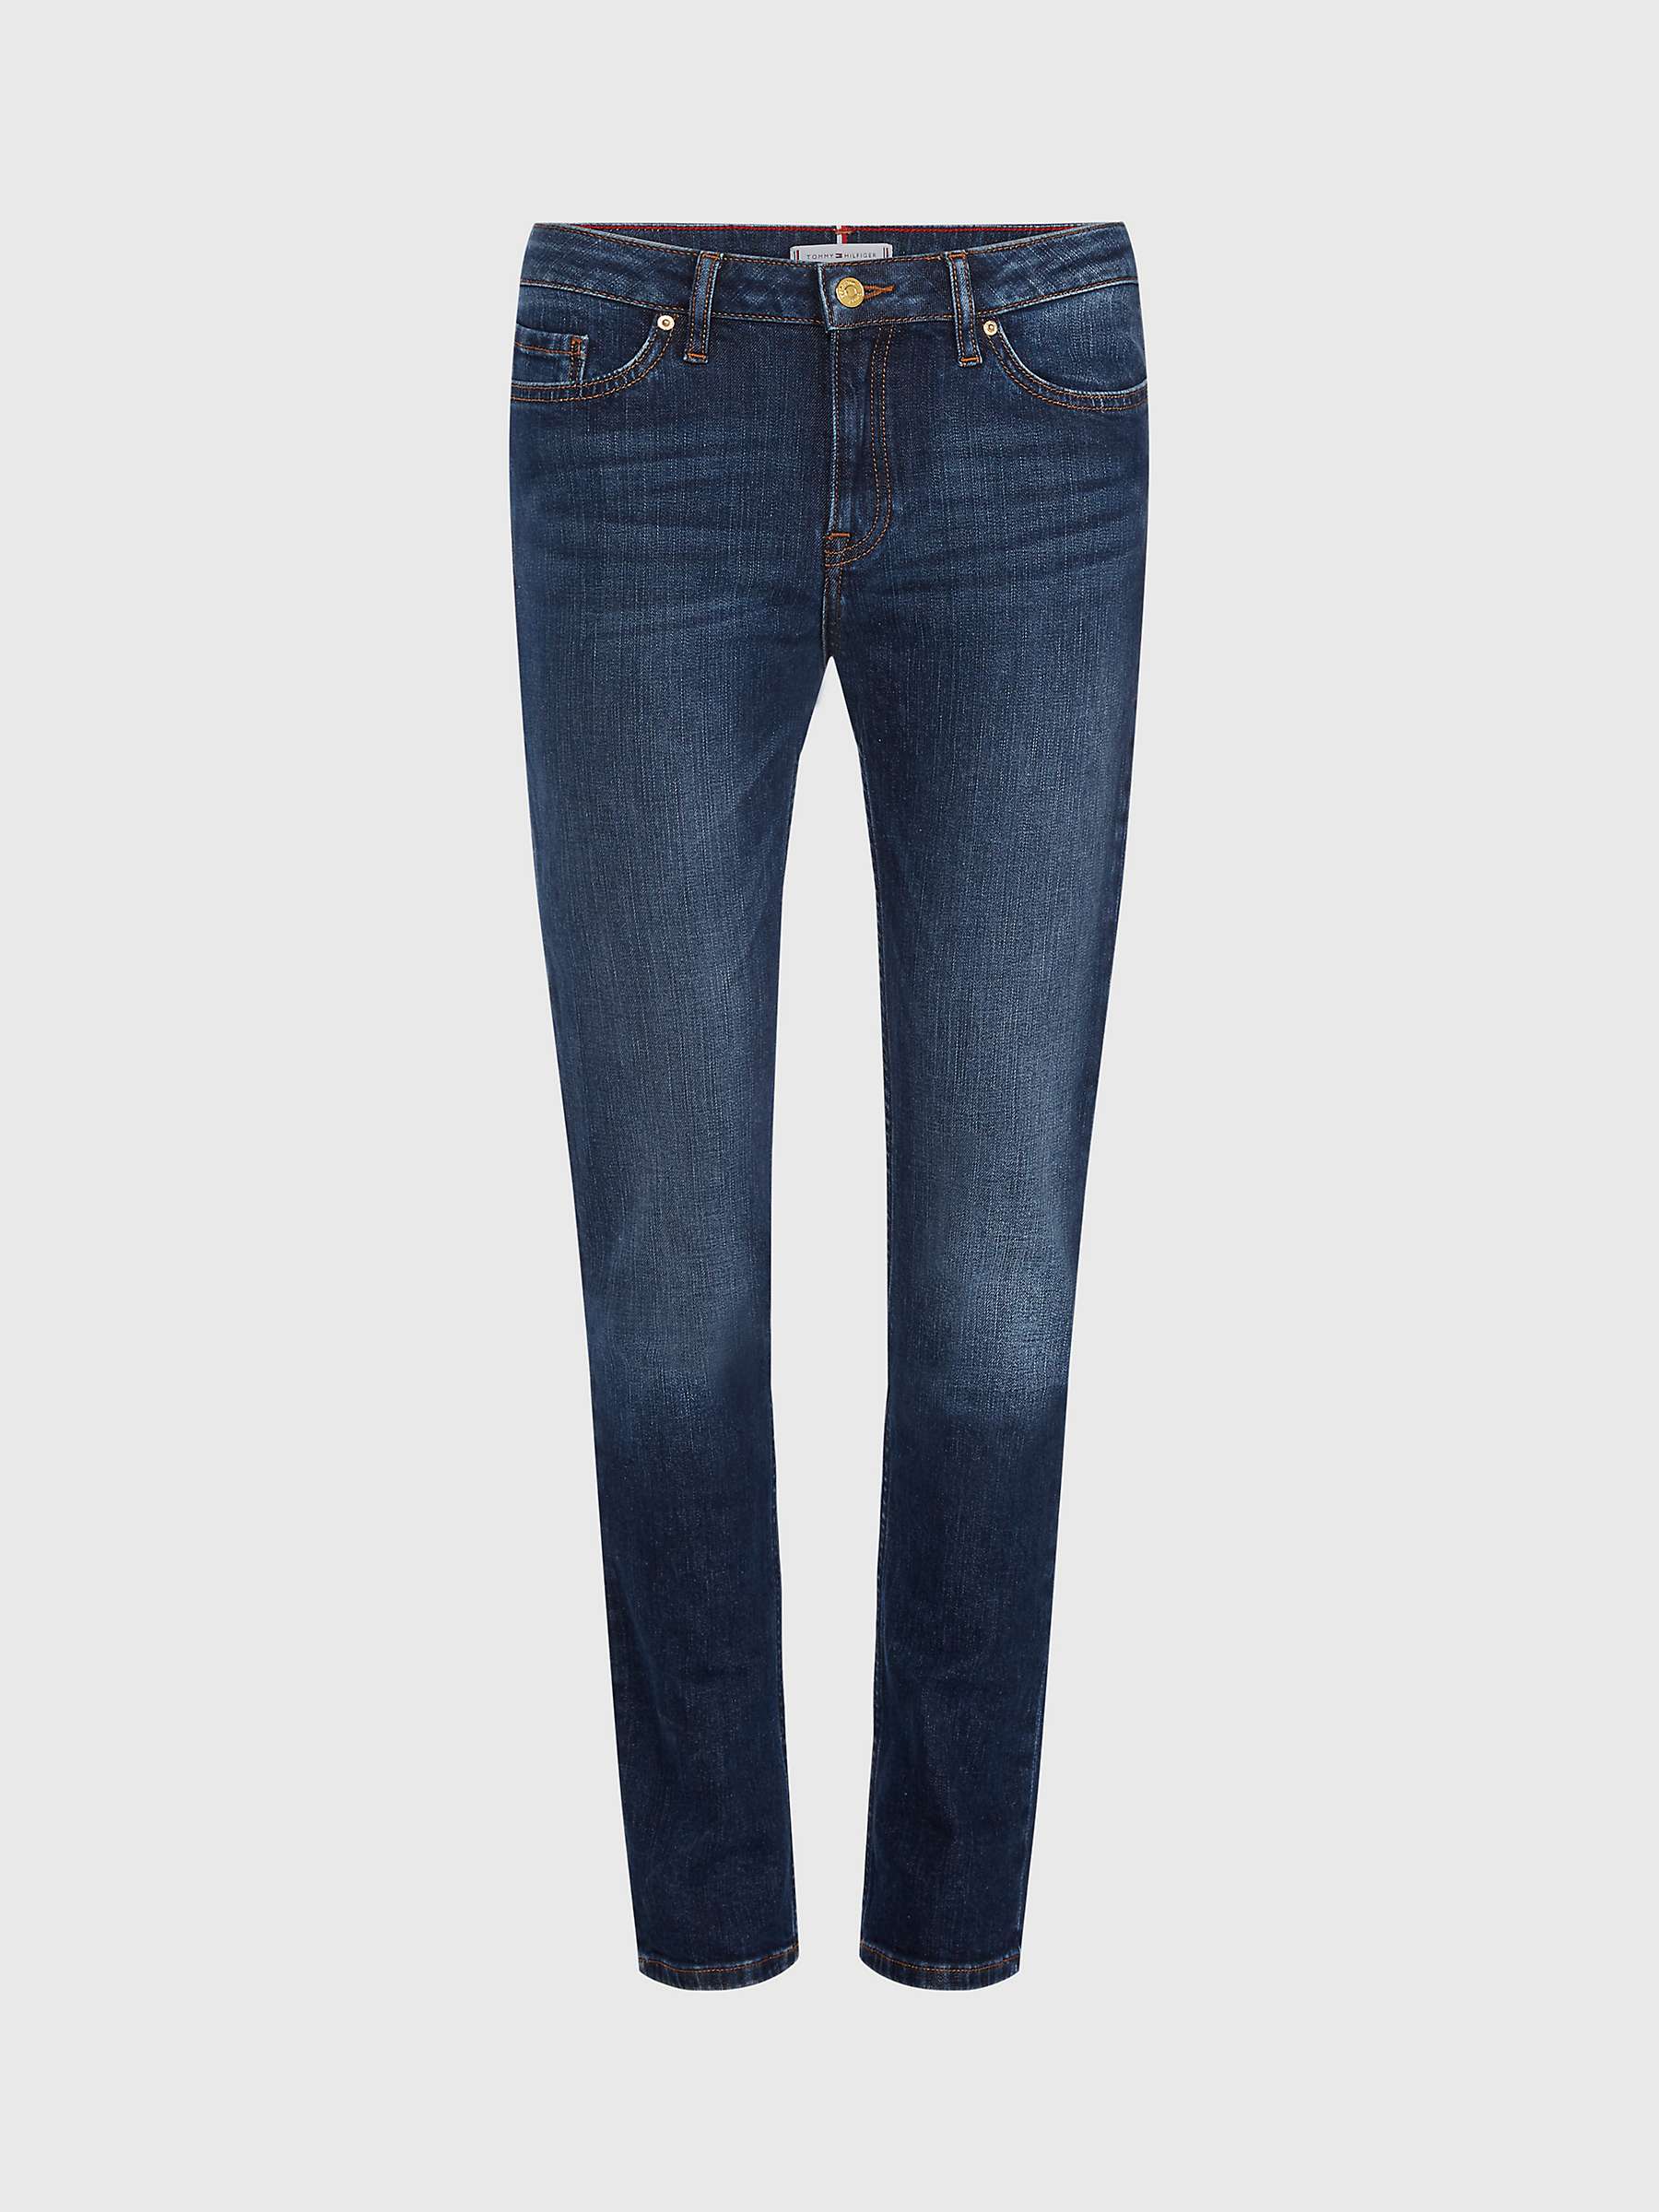 Buy Tommy Hilfiger Straight Fit Jeans, Absolute Blue Wash Online at johnlewis.com